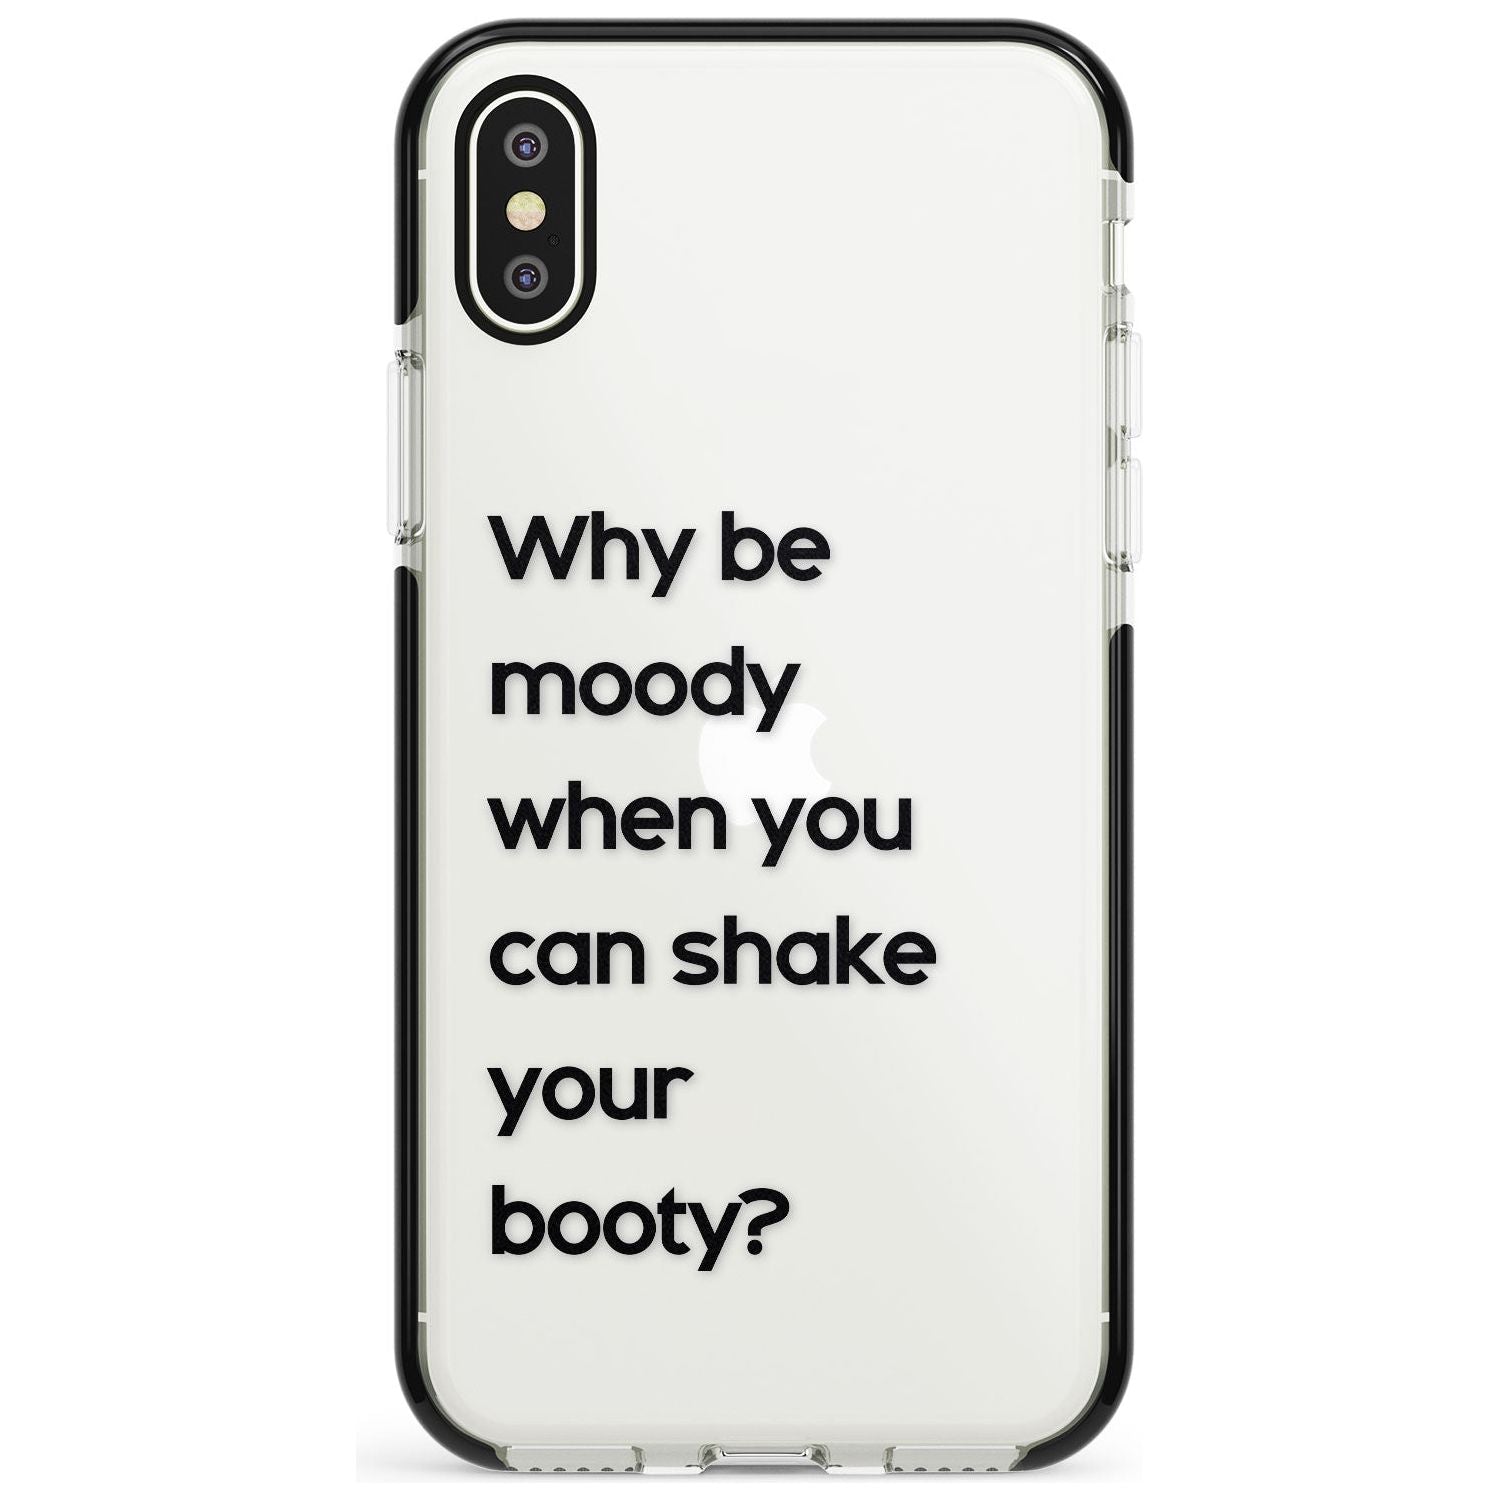 Why be moody? Pink Fade Impact Phone Case for iPhone X XS Max XR